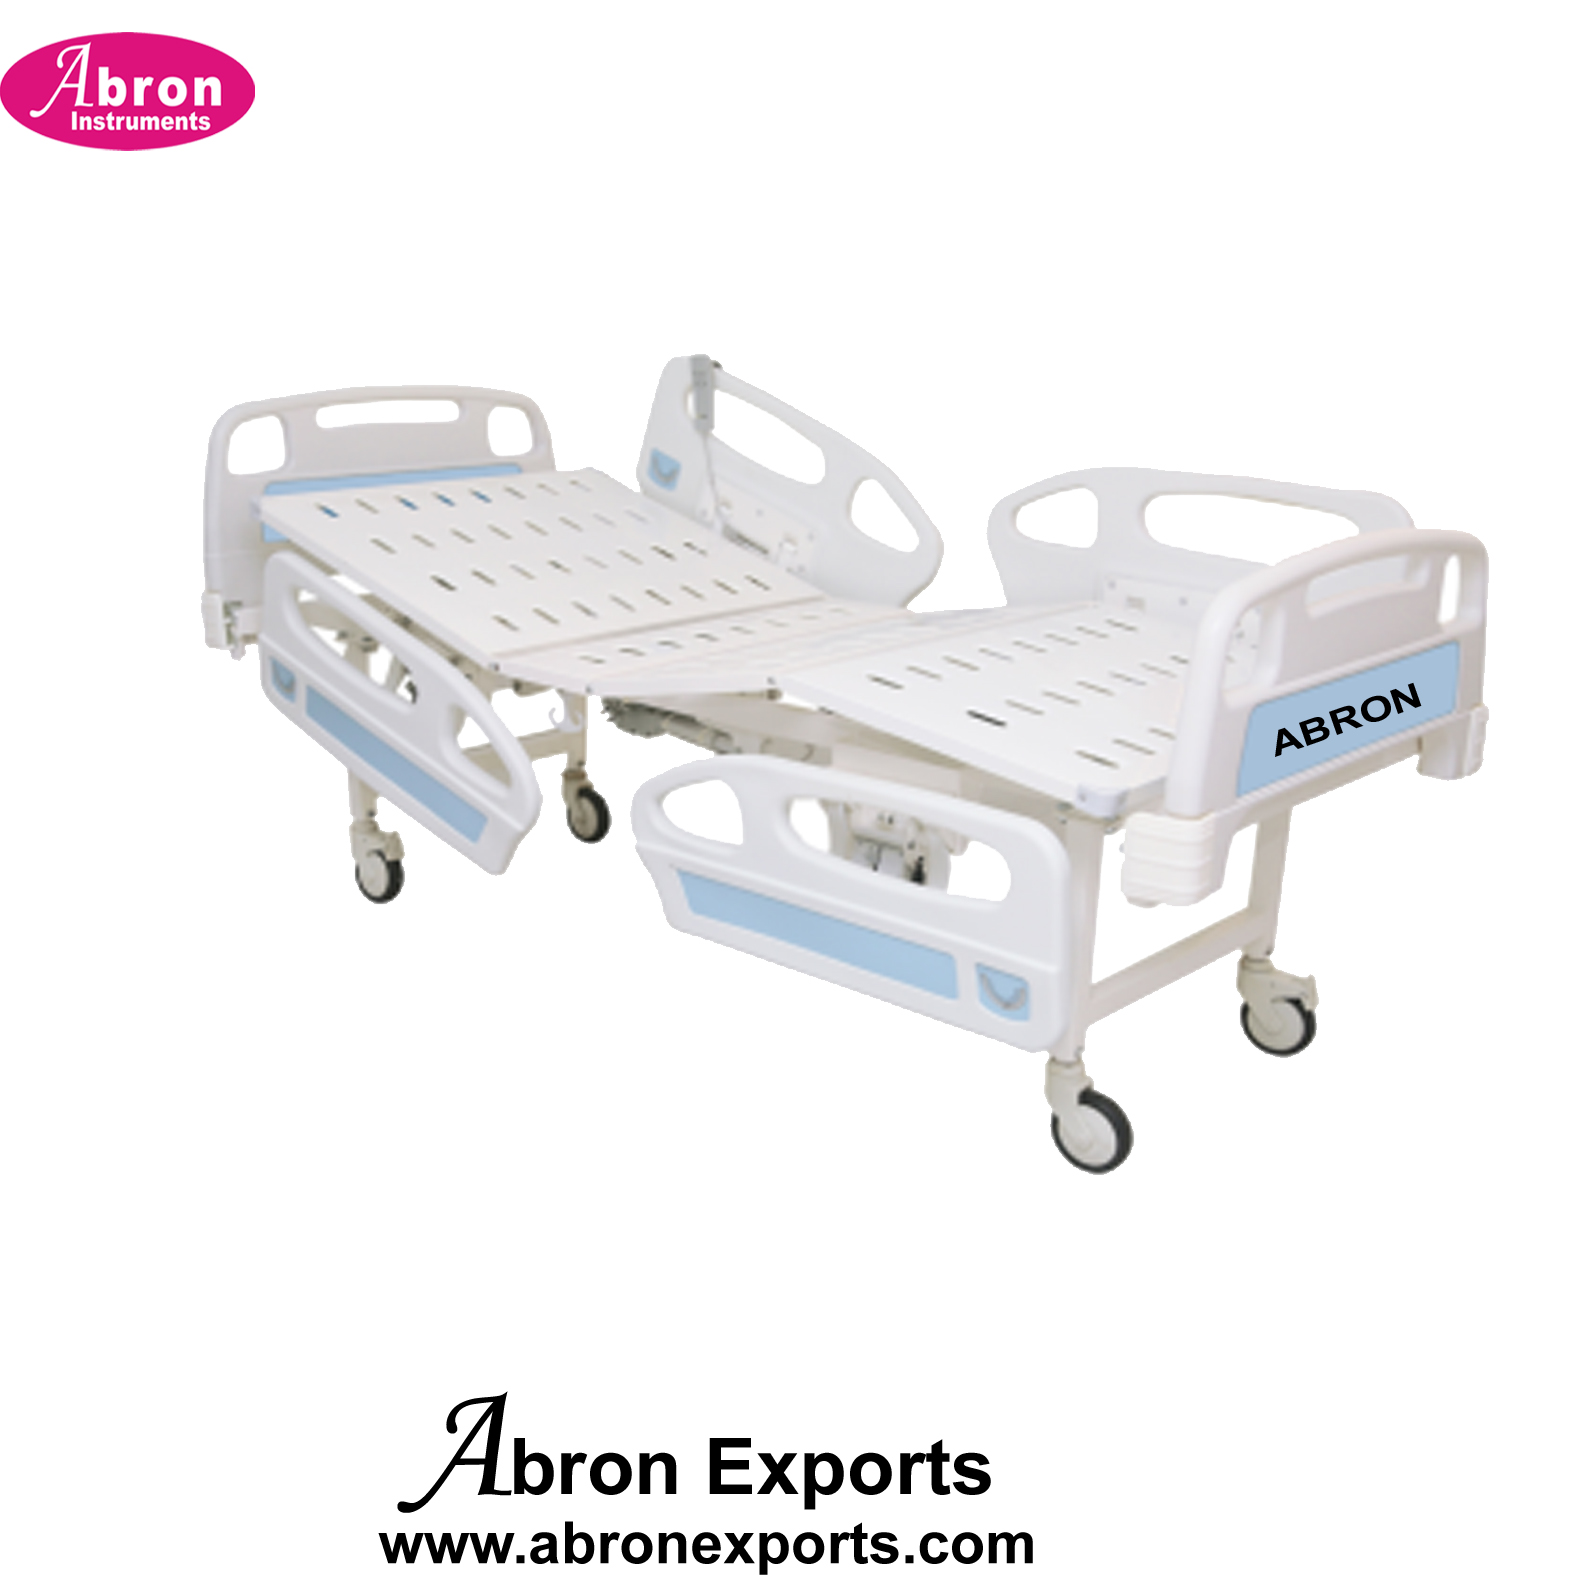 Paitent Stretcher Electric with Fowler Bed 2 function 4 wheel Electric U84 Abron ABM-2261SEF 